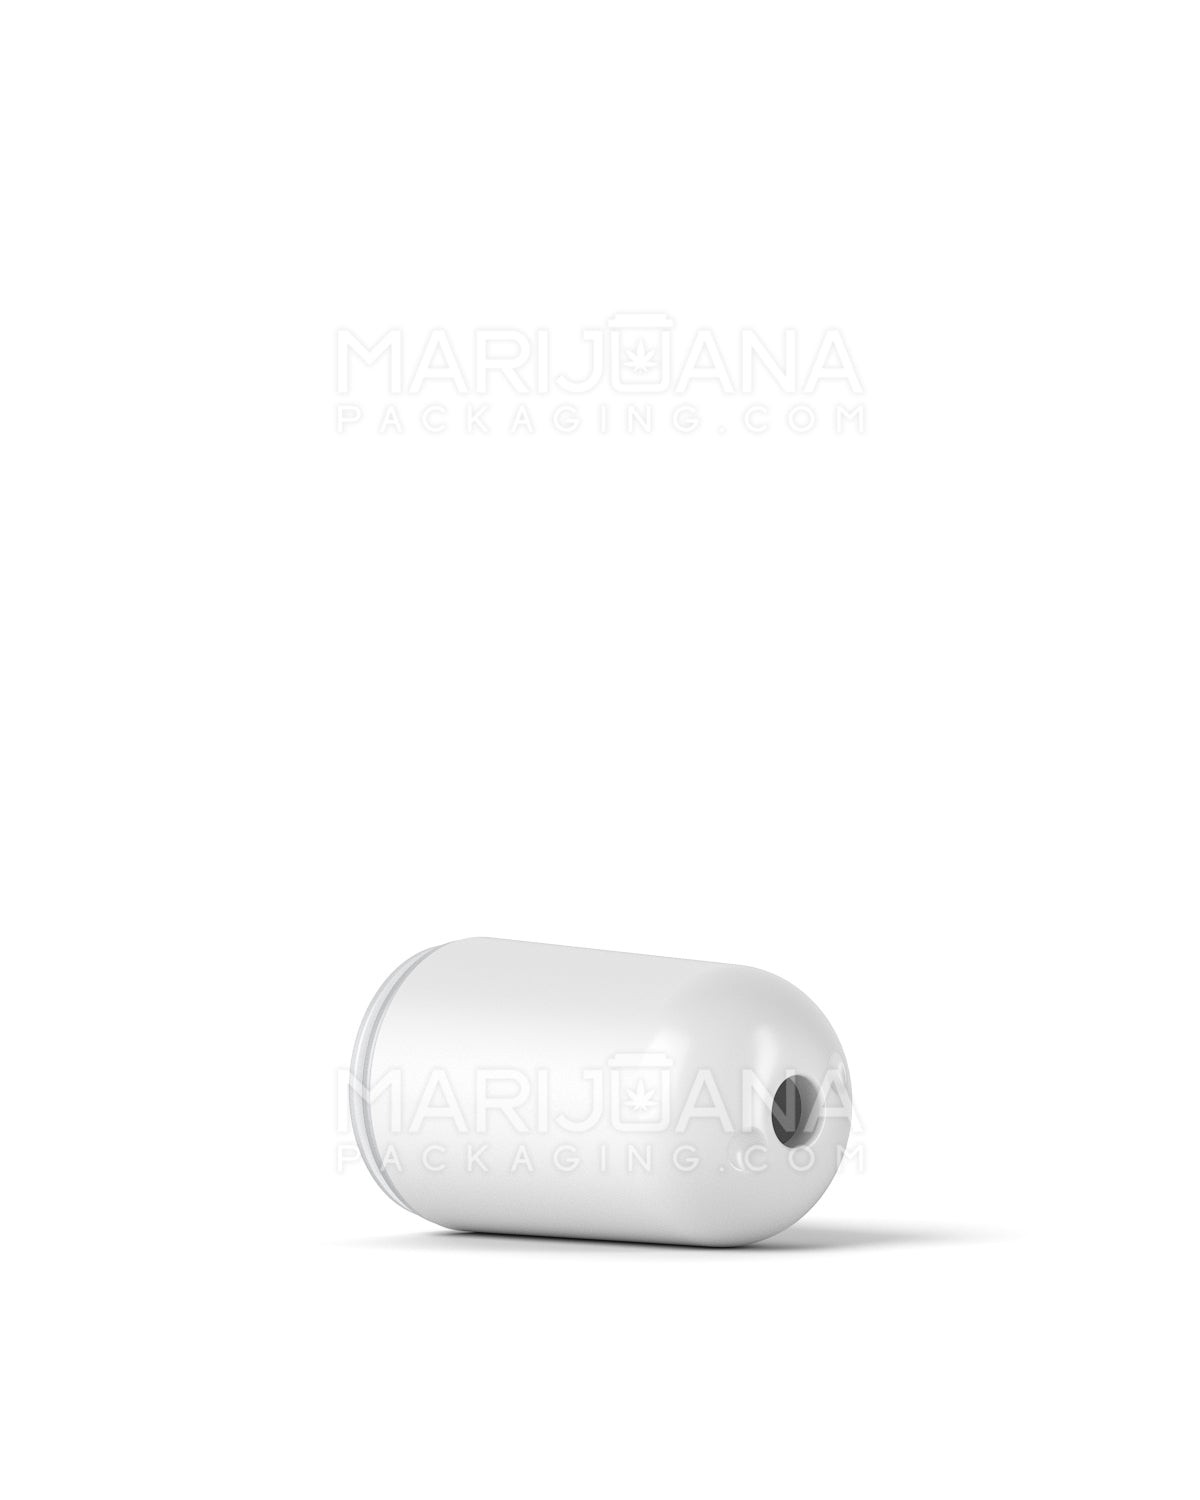 AVD | Round Vape Mouthpiece for Glass Cartridges | White Plastic - Screw On - 600 Count - 5